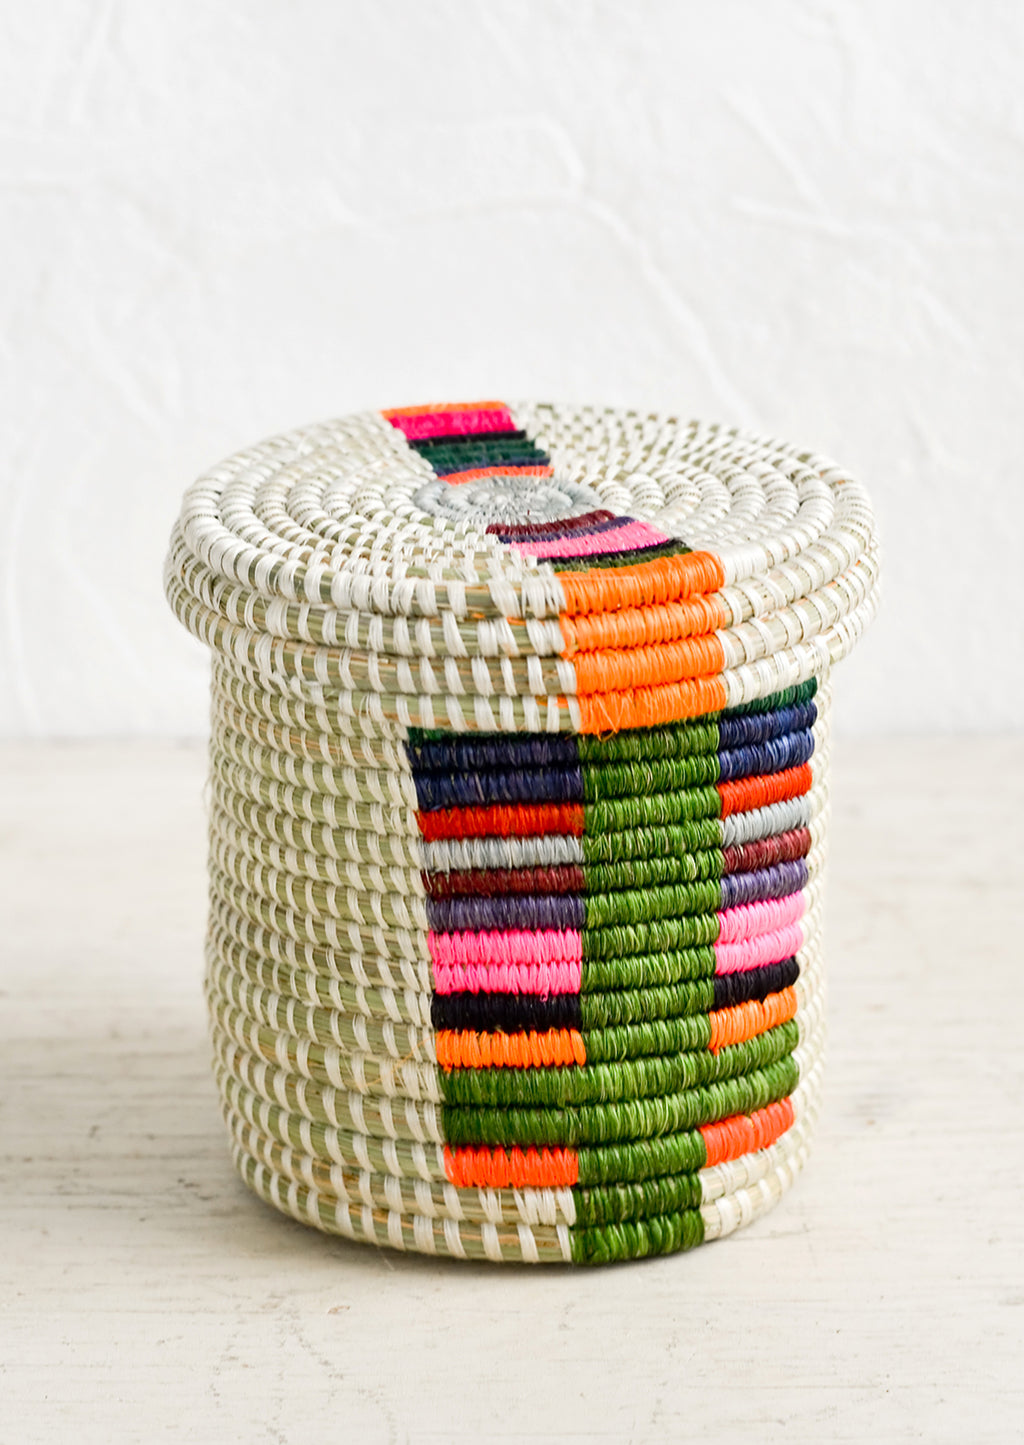 Chroma Multi: A small, round lidded basket made from woven sweetgrass with colorful line pattern.